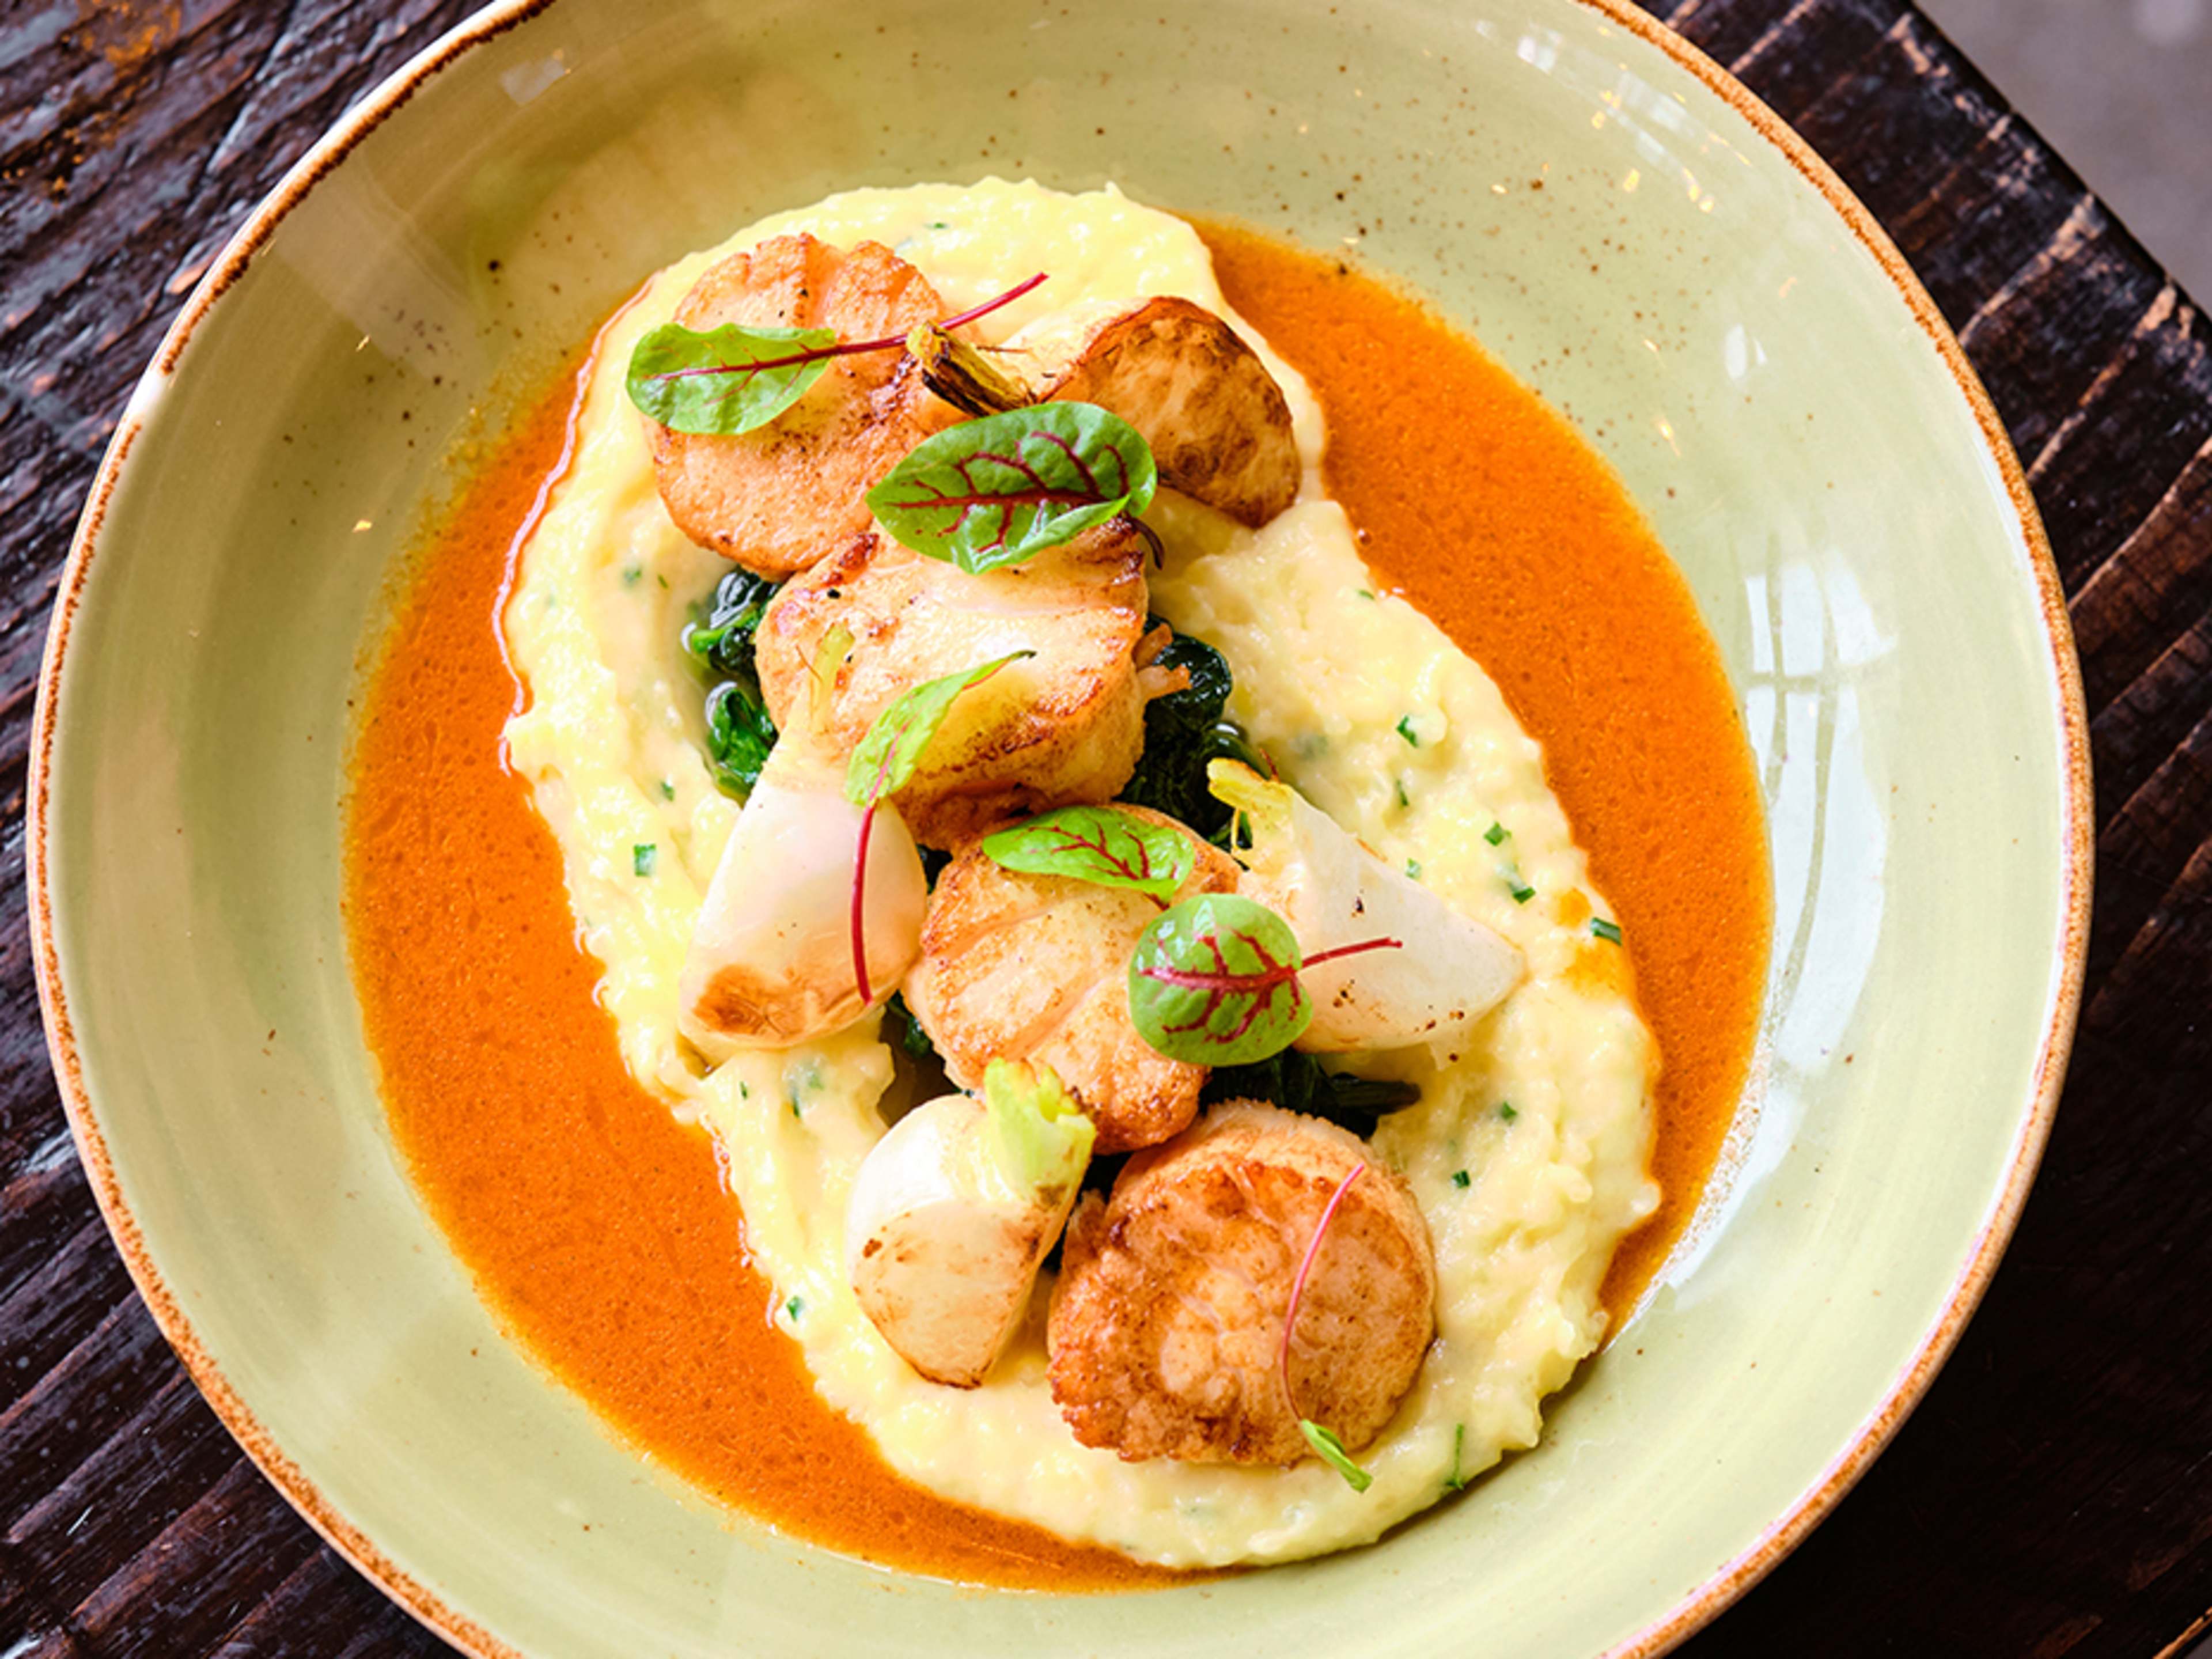 Seared scallops sitting on whipped mashed potatoes.